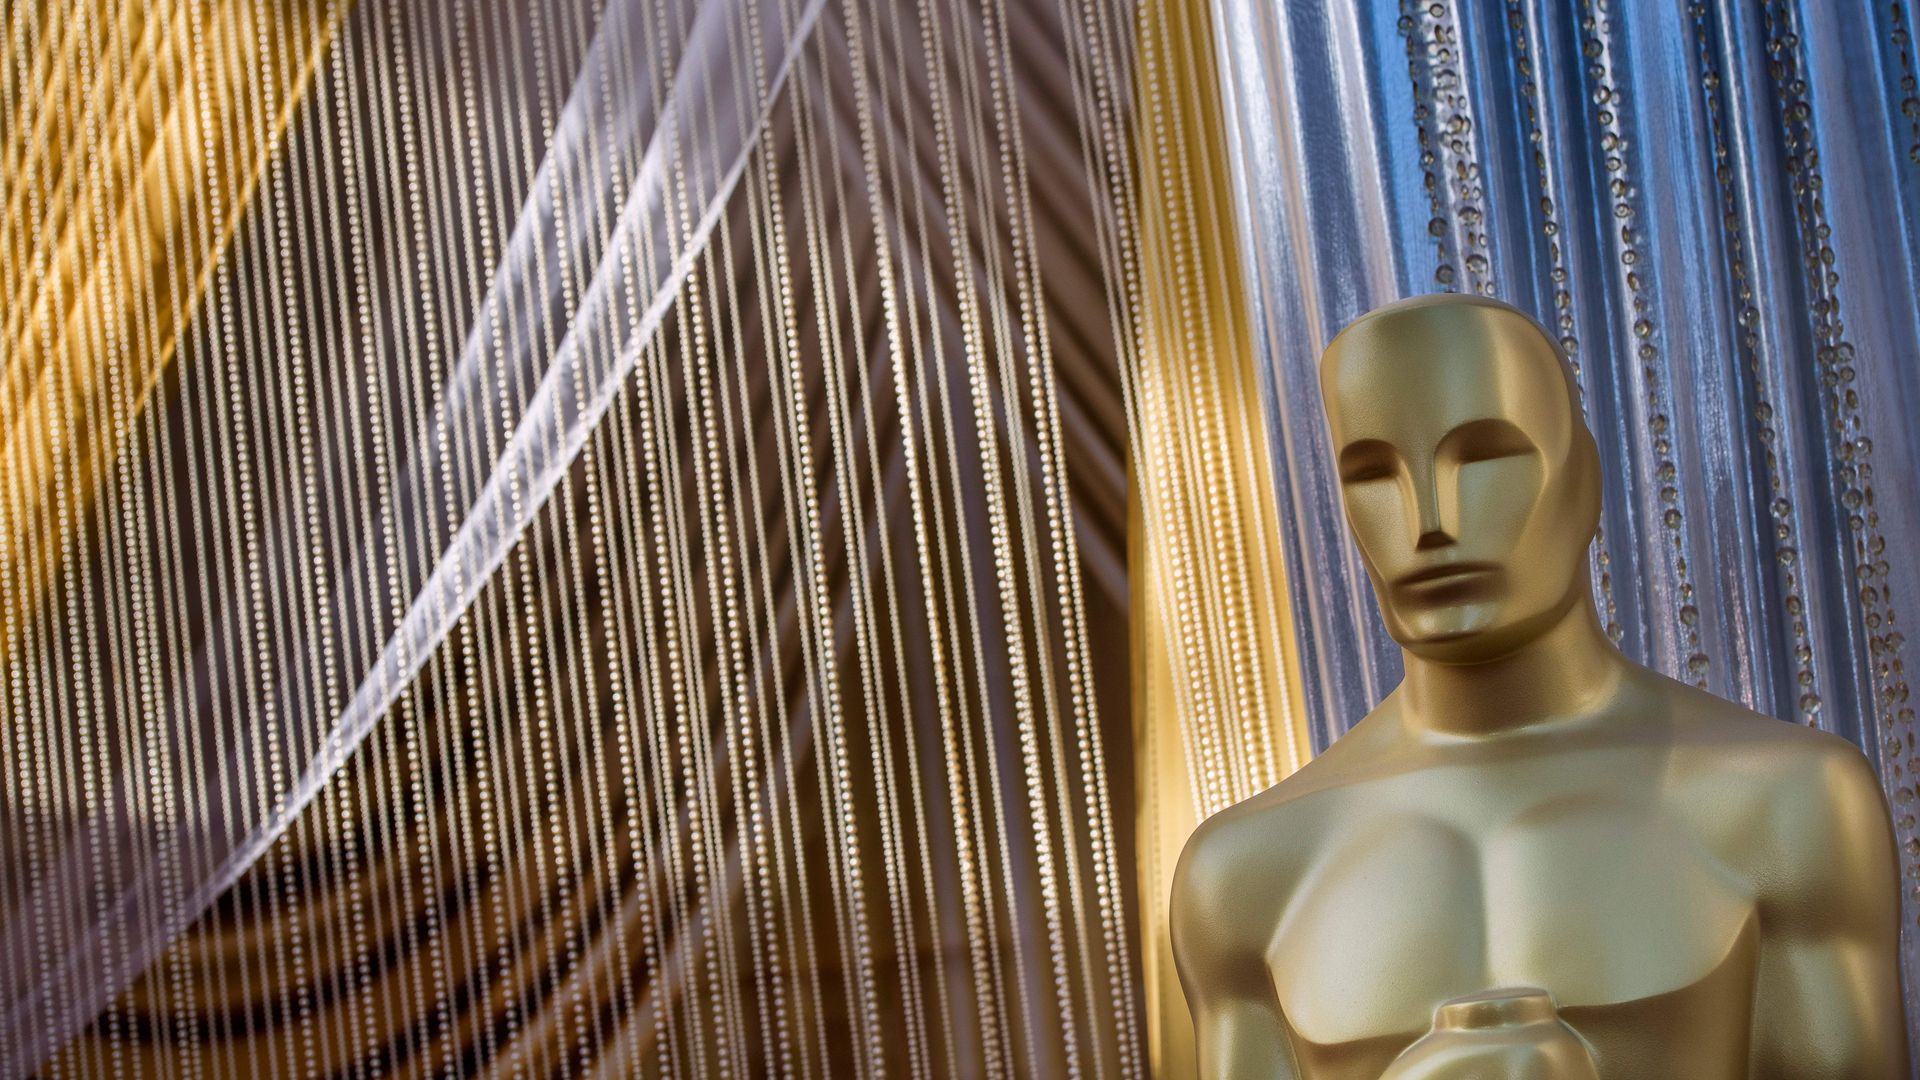 Films vying for Oscars must meet diversity qualifications, Academy says